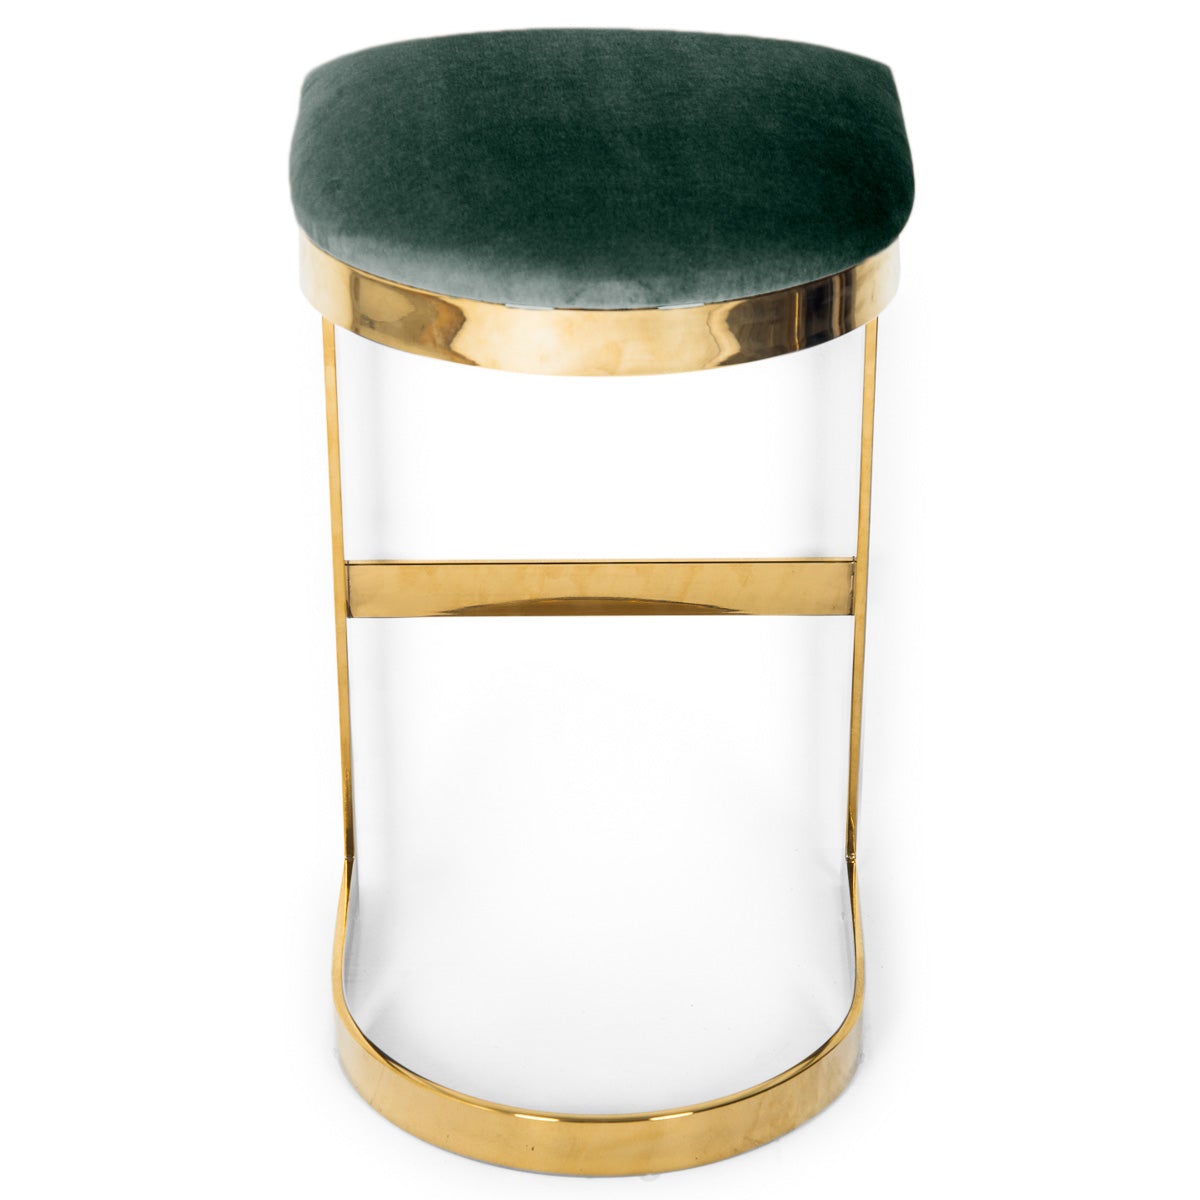 Ibiza Backless Bar and Counter Stool in Velvet - ModShop1.com